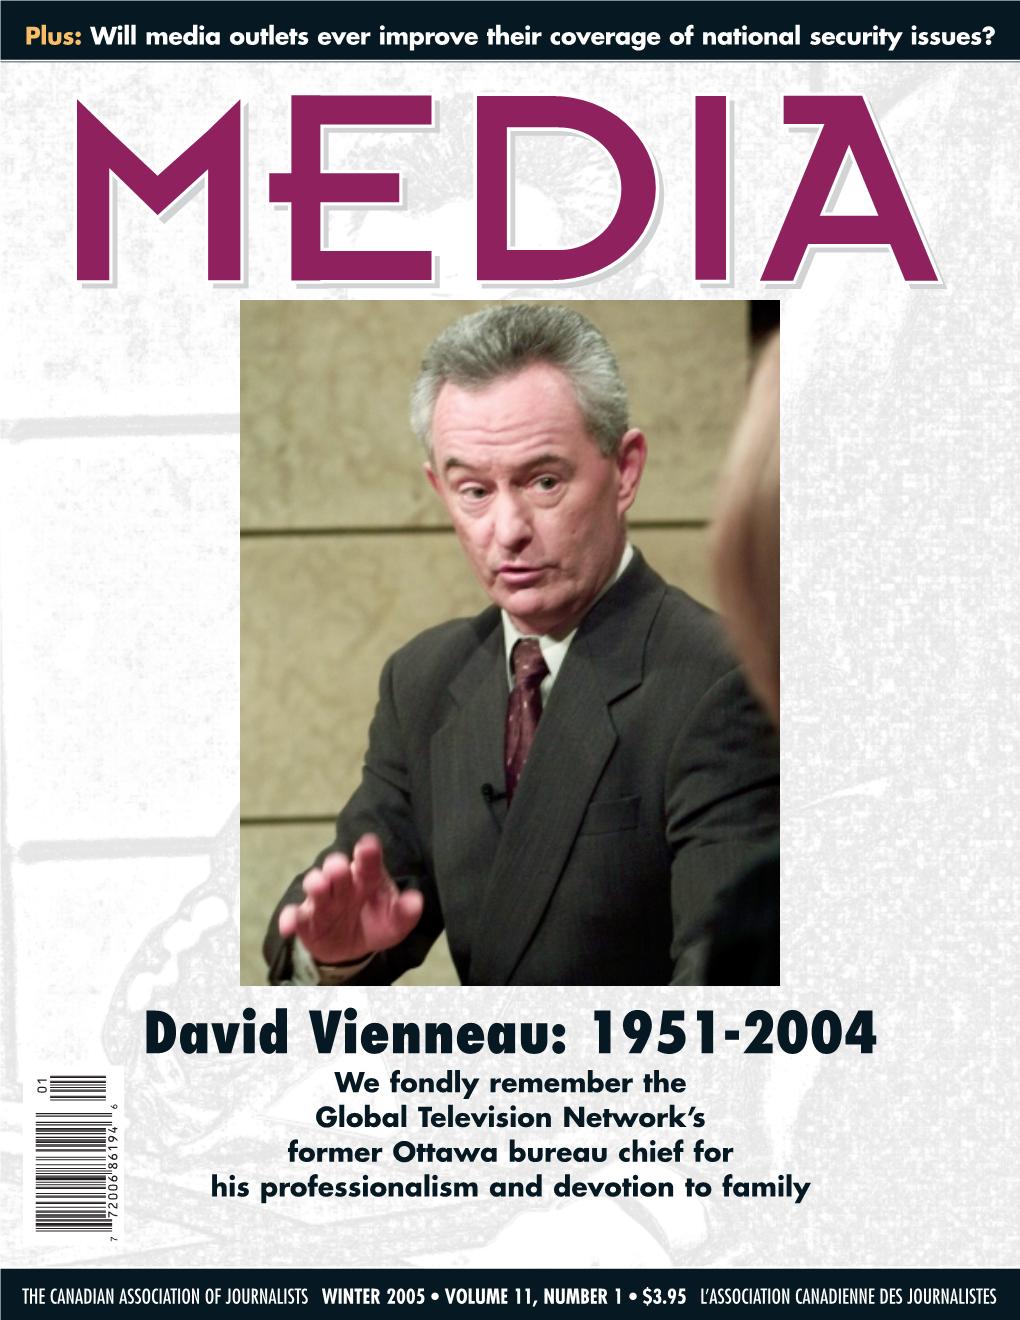 David Vienneau: 1951-2004 We Fondly Remember the Global Television Network’S Former Ottawa Bureau Chief for His Professionalism and Devotion to Family